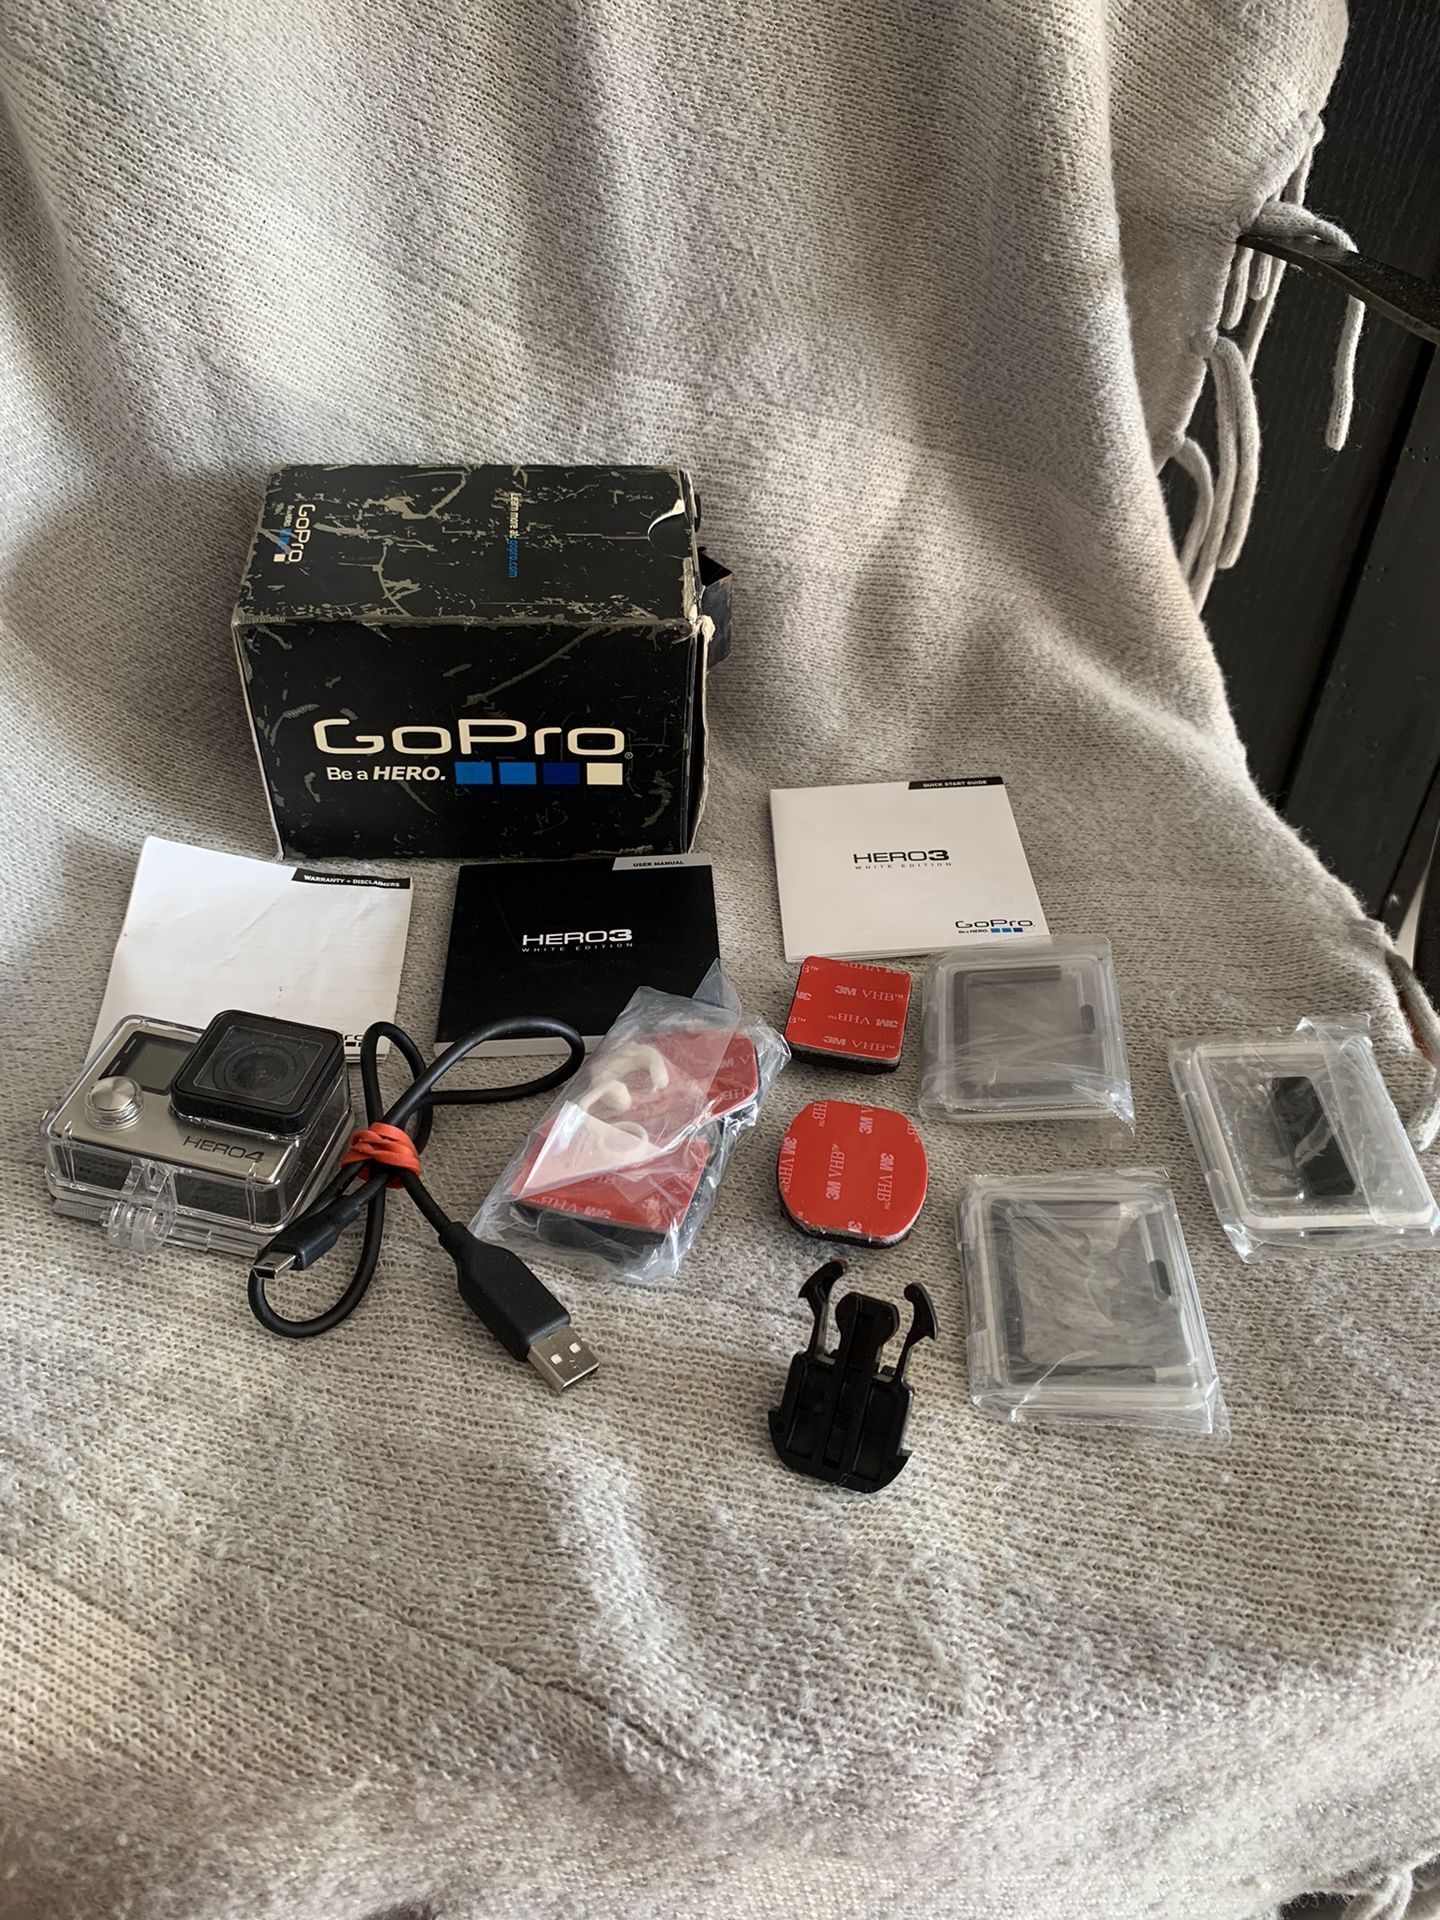 GoPro Hero 4 cam and accessories